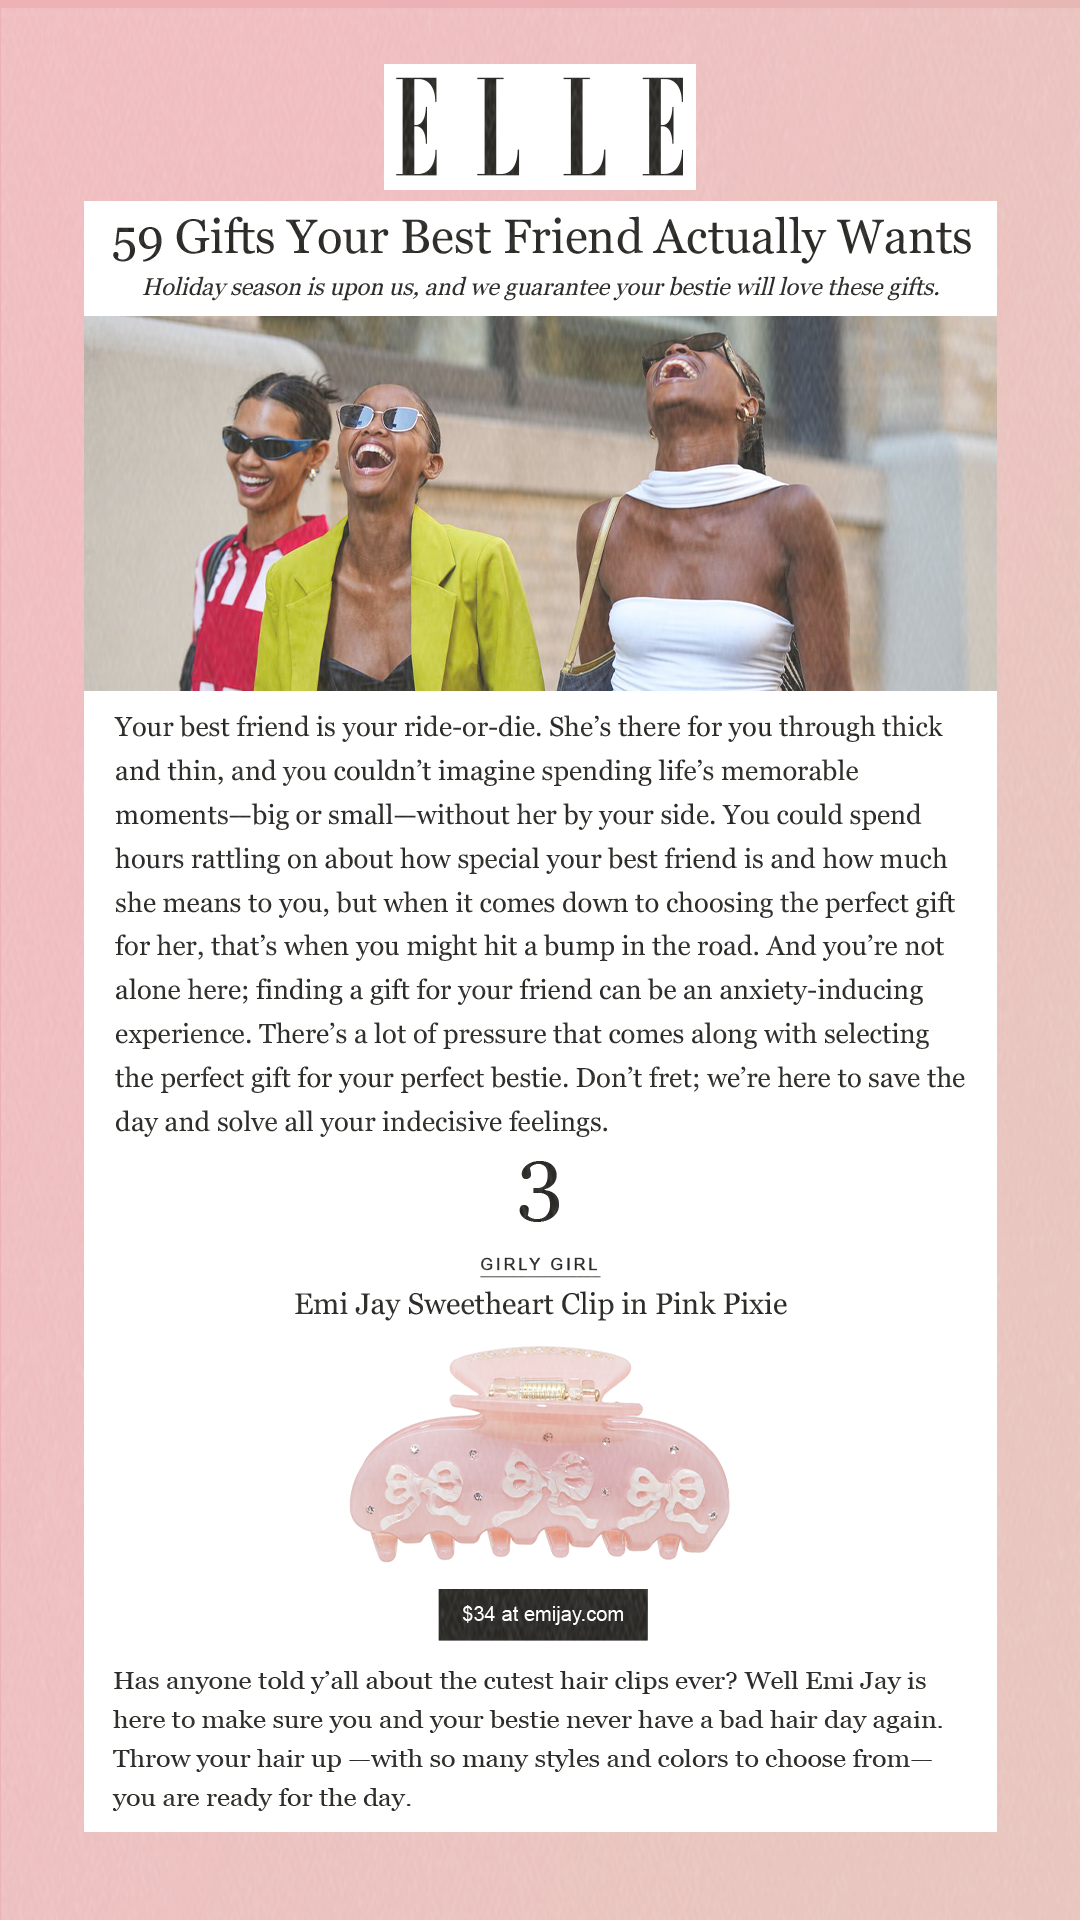 59 Gifts Your Best Friend Actually WantsHoliday season is upon us, and we guarantee your bestie will love these gifts. Your best friend is your ride-or-die. She’s there for you through thick and thin, and you couldn’t imagine spending life’s memorable moments—big or small—without her by your side. You could spend hours rattling on about how special your best friend is and how much she means to you, but when it comes down to choosing the perfect gift for her, that’s when you might hit a bump in the road. And you’re not alone here; finding a gift for your friend can be an anxiety-inducing experience. There’s a lot of pressure that comes along with selecting the perfect gift for your perfect bestie. Don’t fret; we’re here to save the day and solve all your indecisive feelings. 3Girly Girl Emi Jay Sweetheart Clip in Pink Pixie $34 at emijay.com Has anyone told y’all about the cutest hair clips ever? Well Emi Jay is here to make sure you and your bestie never have a bad hair day again. Throw your hair up —with so many styles and colors to choose from—you are ready for the day.